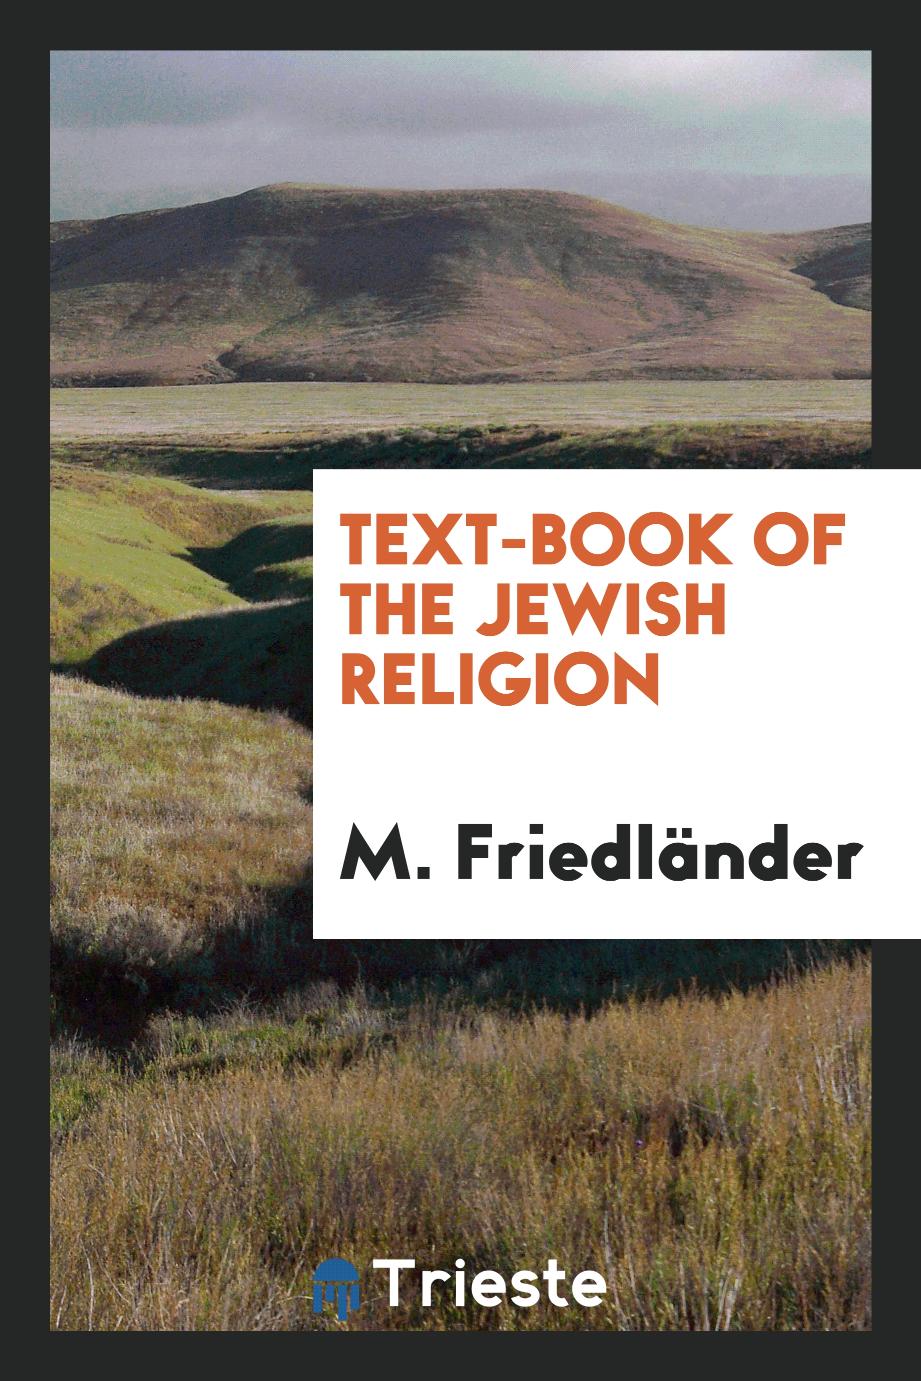 Text-book of the Jewish Religion